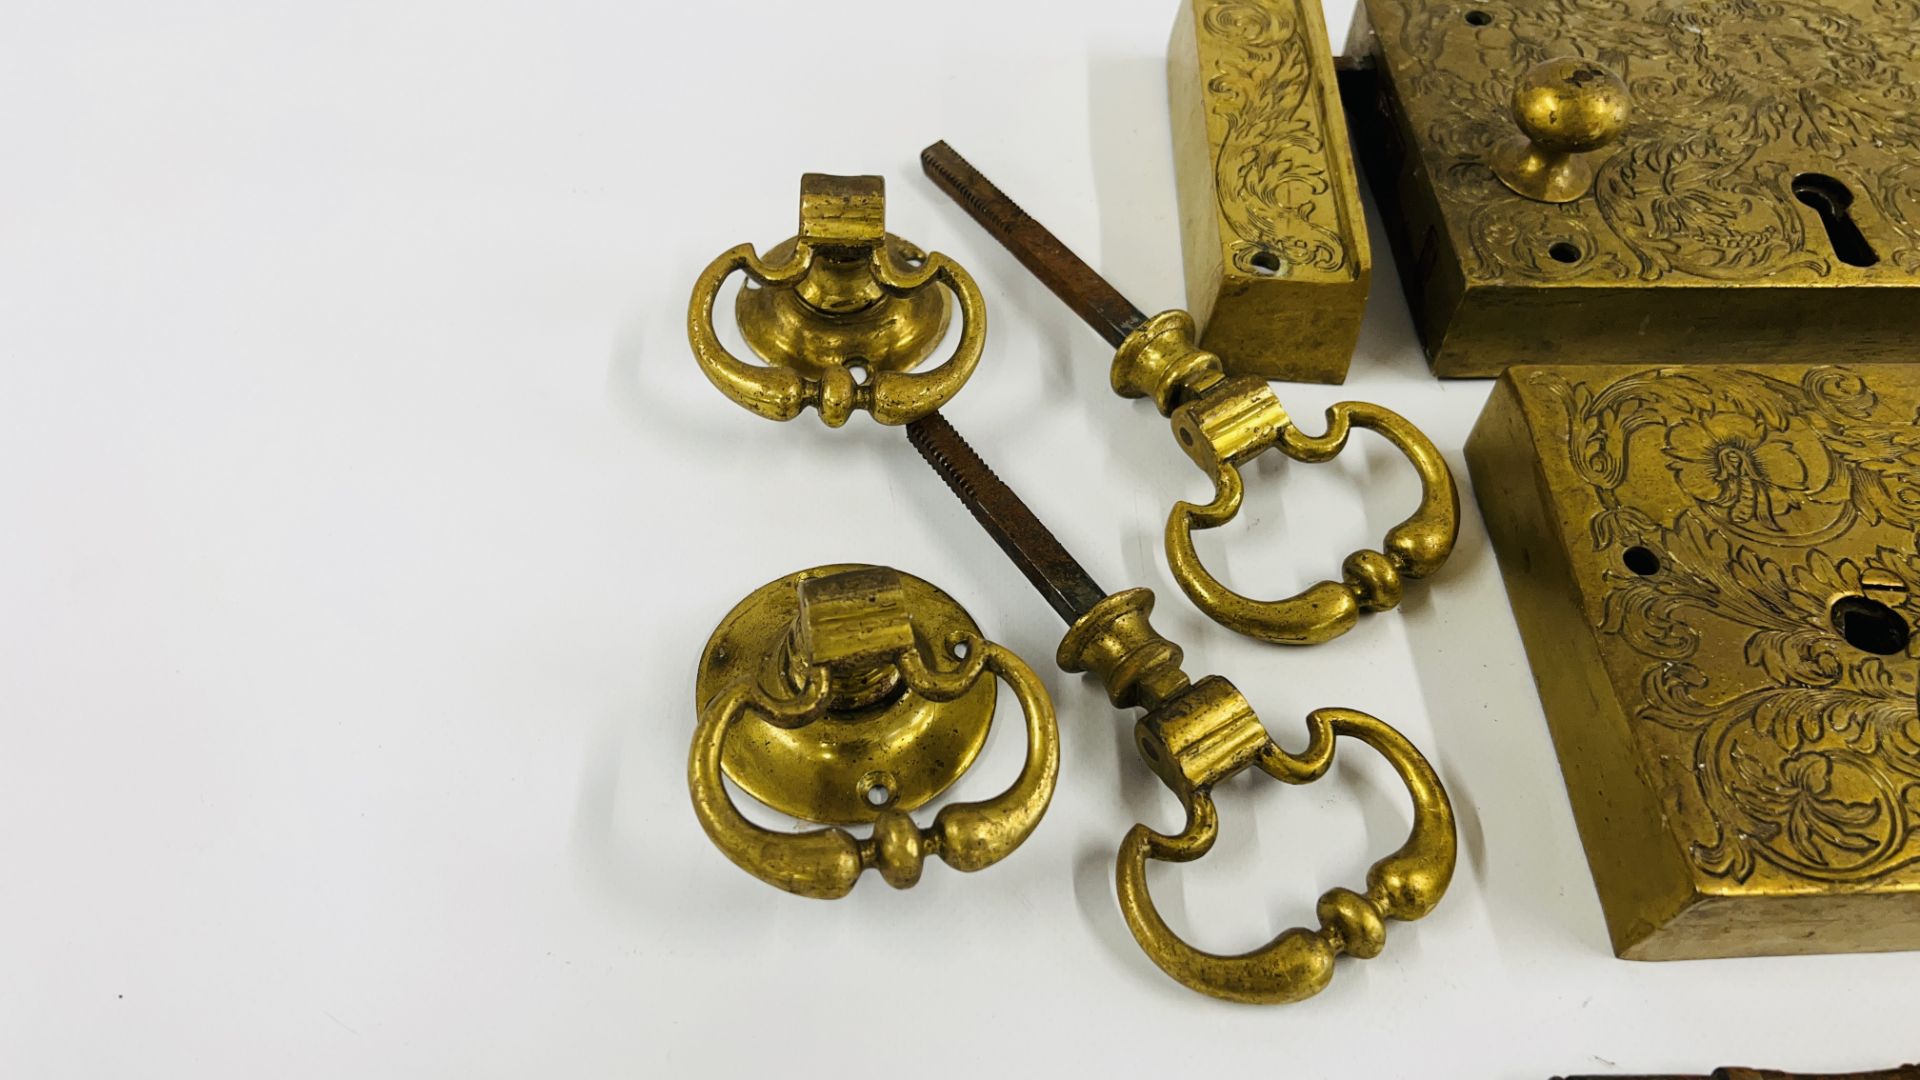 A PAIR OF ELABORATE ANTIQUE SOLID BRASS DOOR LOCKS PROBABLY C18th RETAINING THE ORIGINAL KEYS, - Image 7 of 12